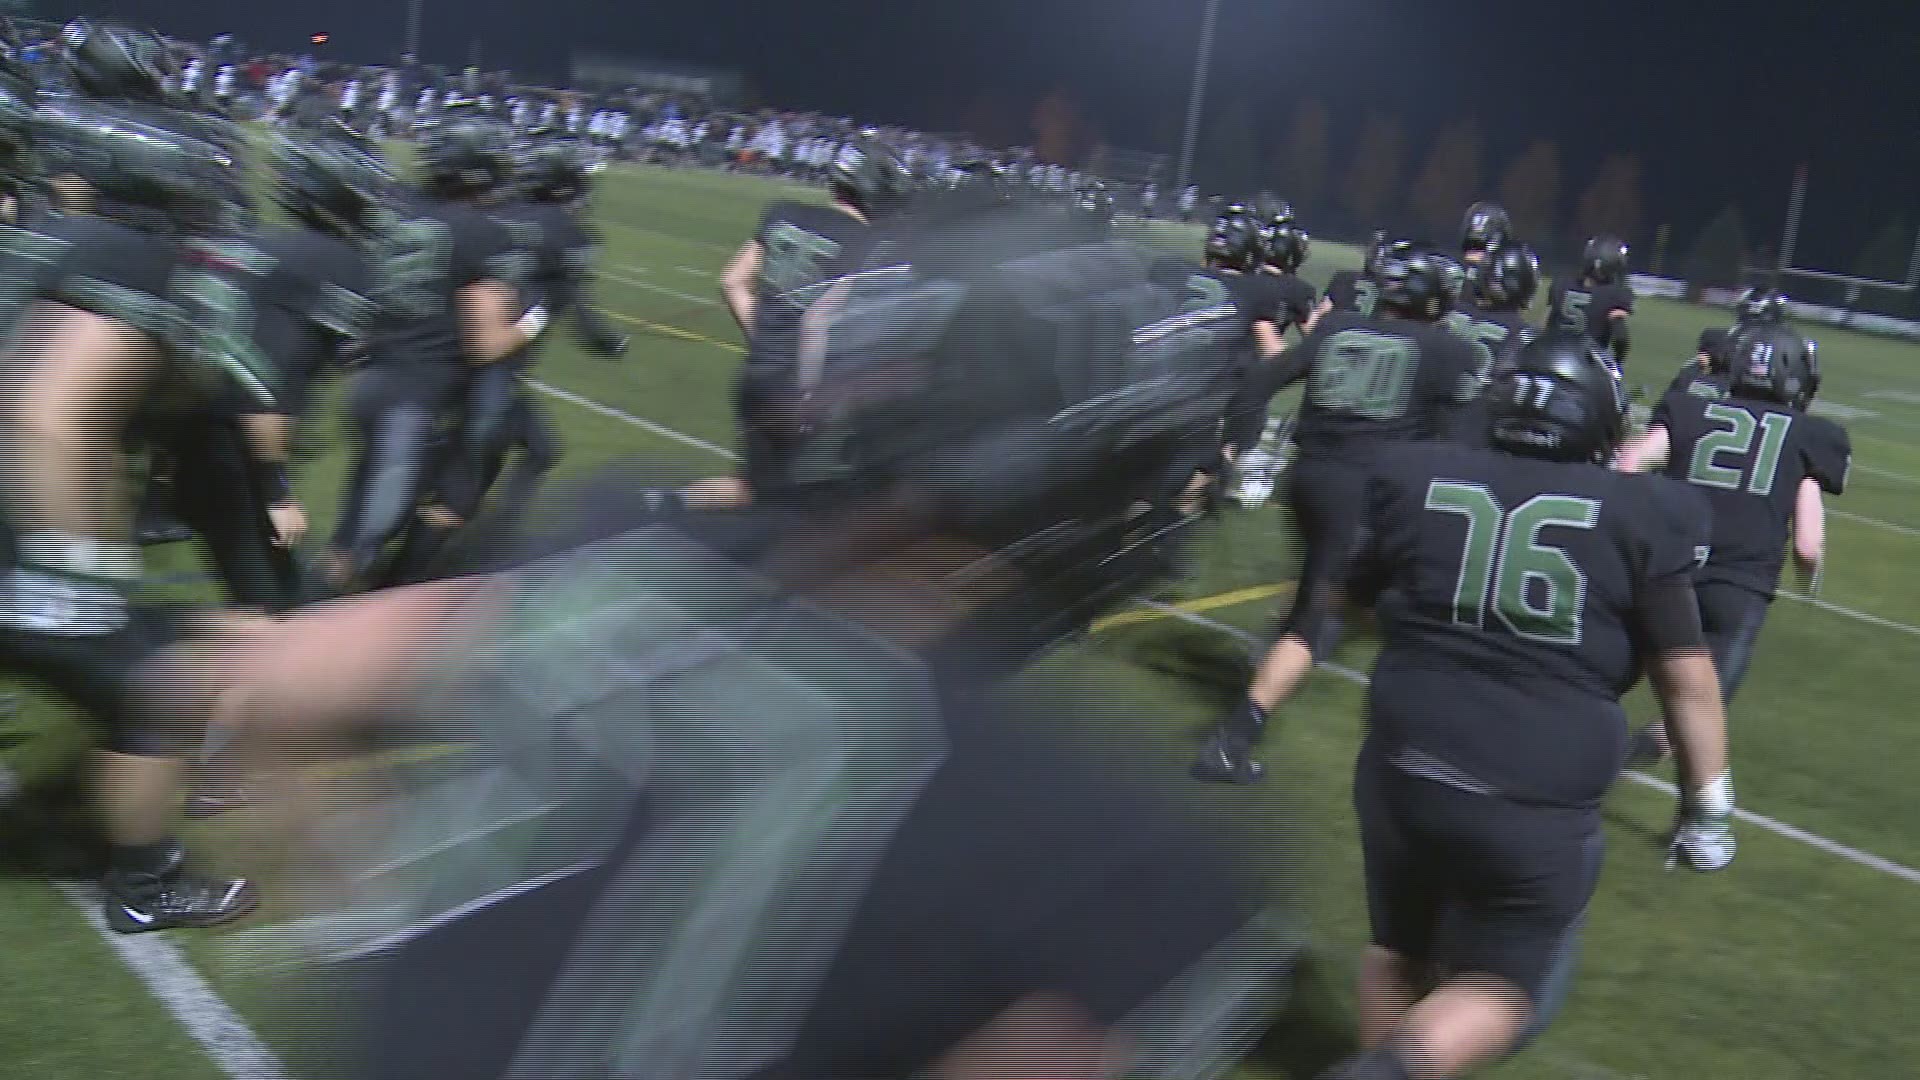 Highlights of Mountainside's 34-31 overtime win over Tigard in the second round of the playoffs. Highlights are part of Friday Night Flights with Orlando Sanchez.